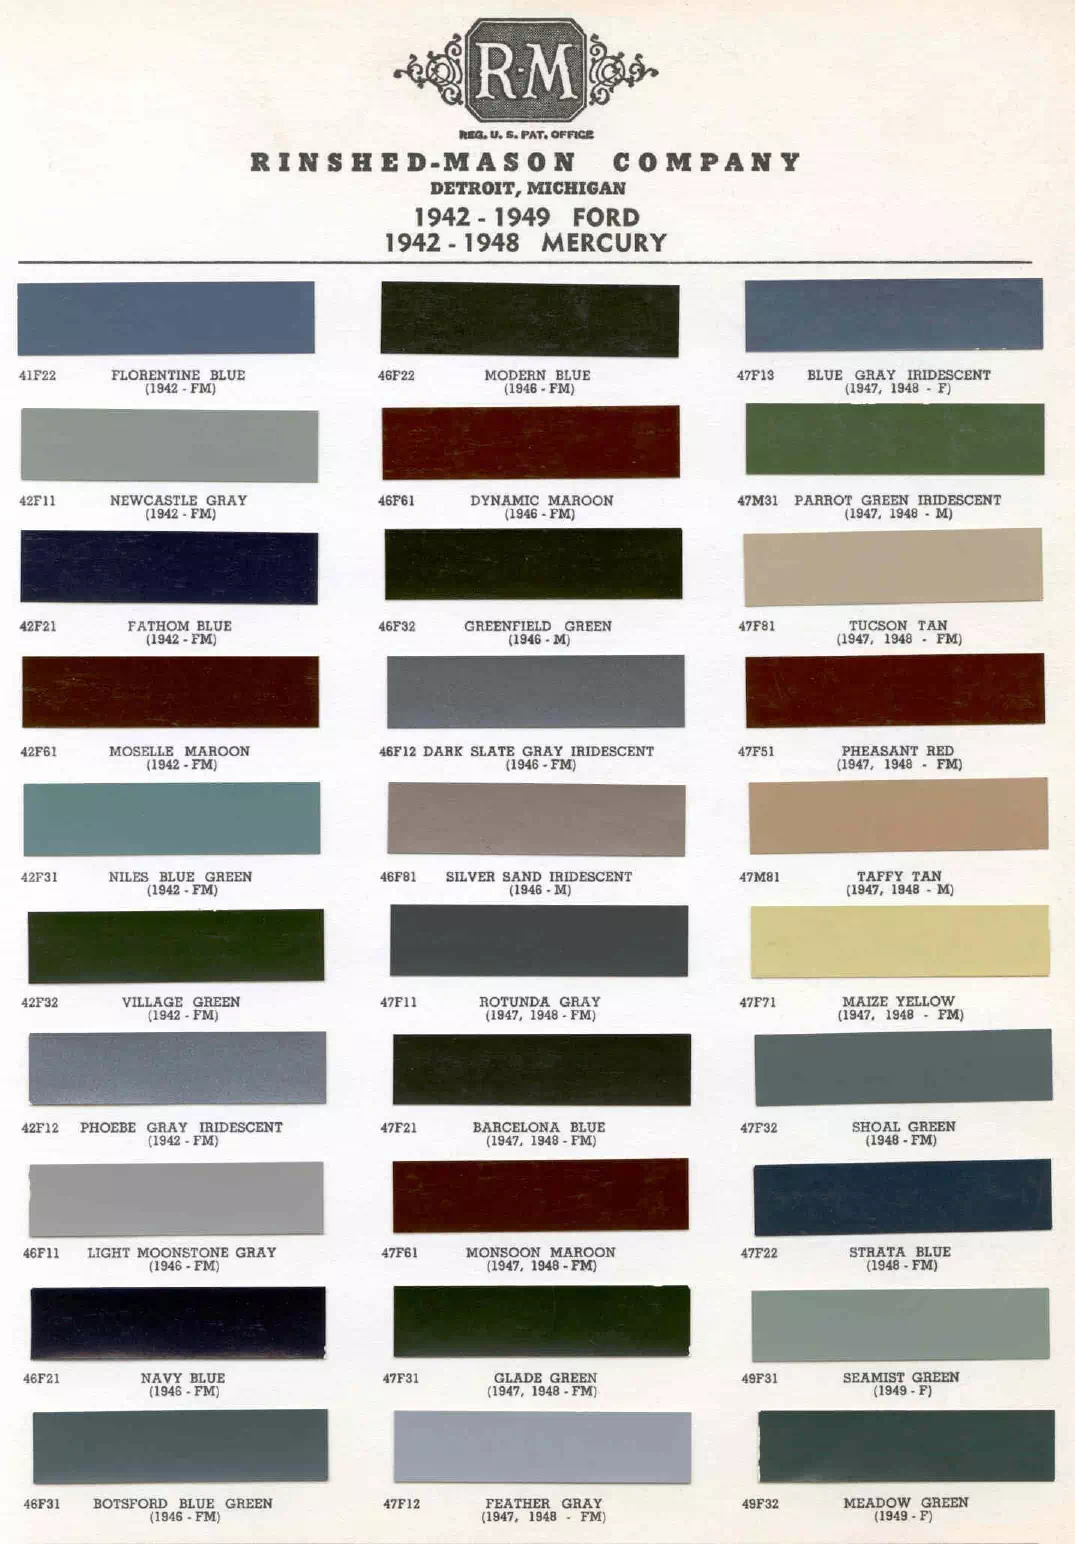 oem paint codes, color names, and color swatches used on Mercury vehicles